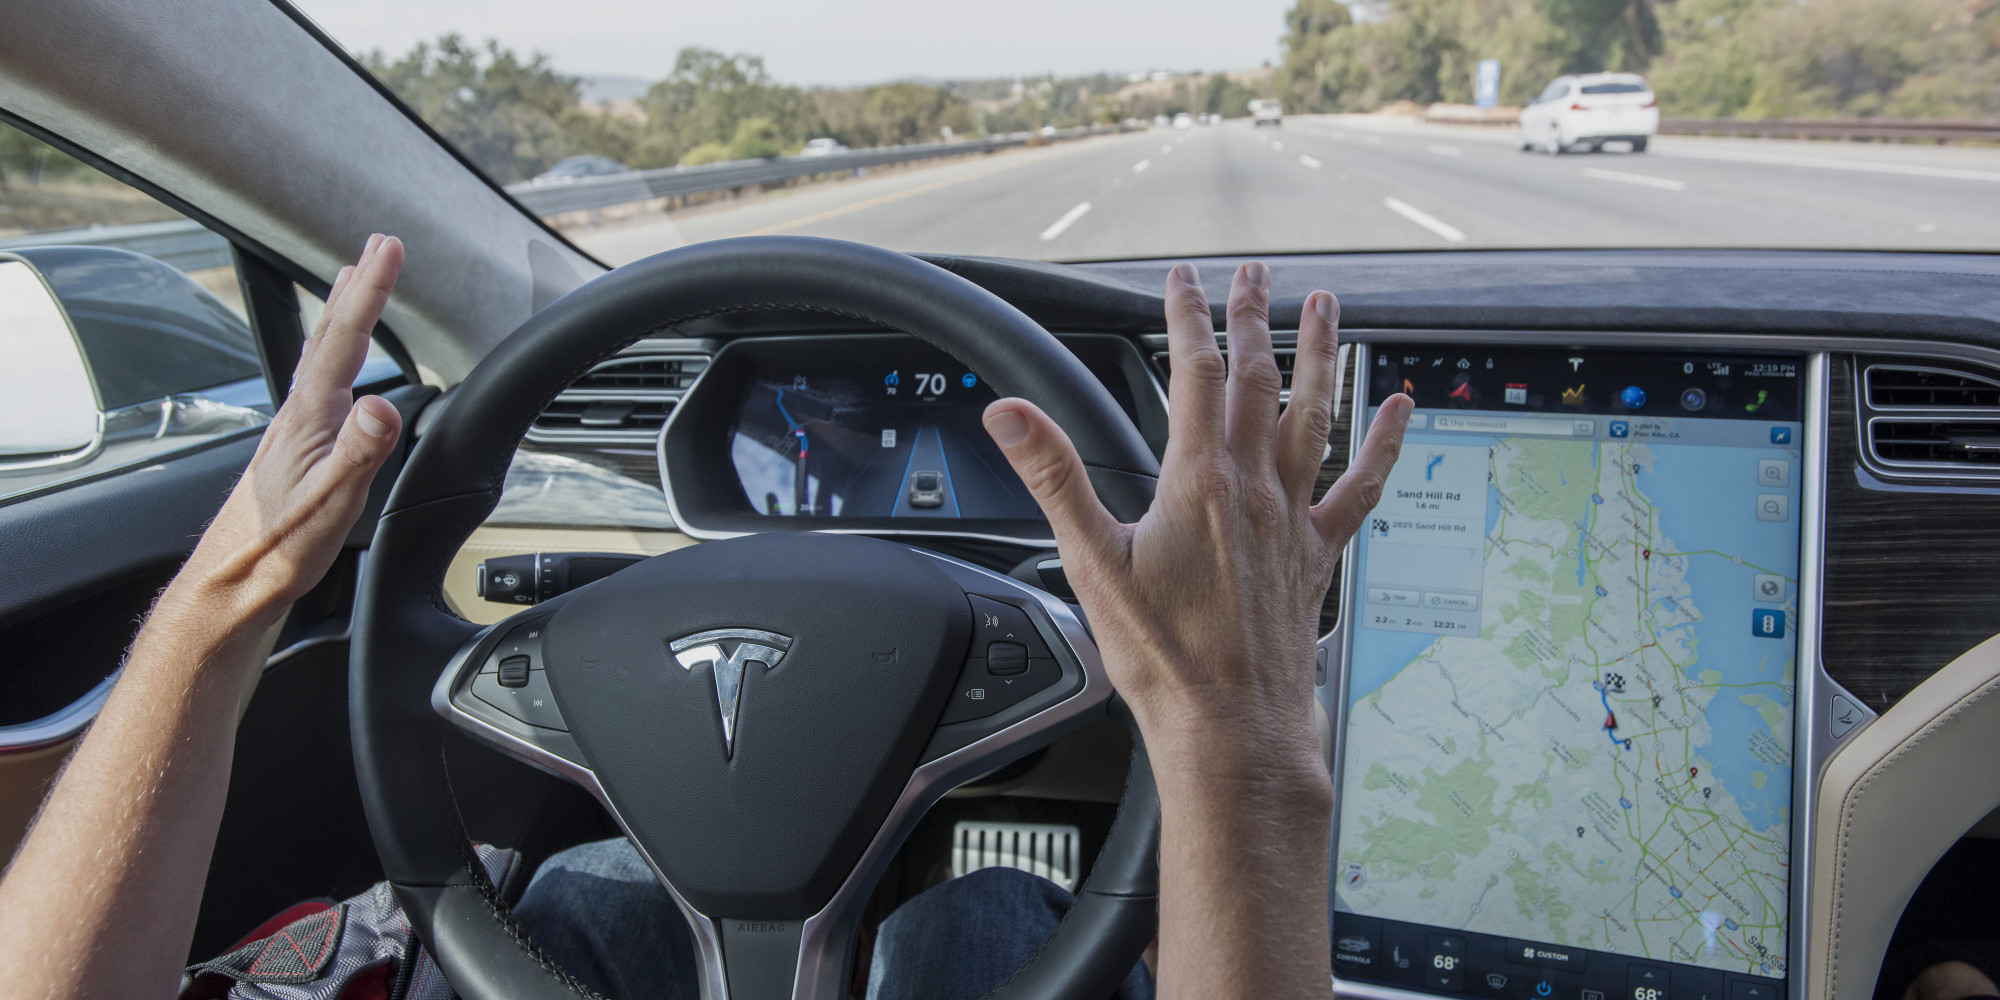 Germany says Tesla should not use 'Autopilot' in advertising